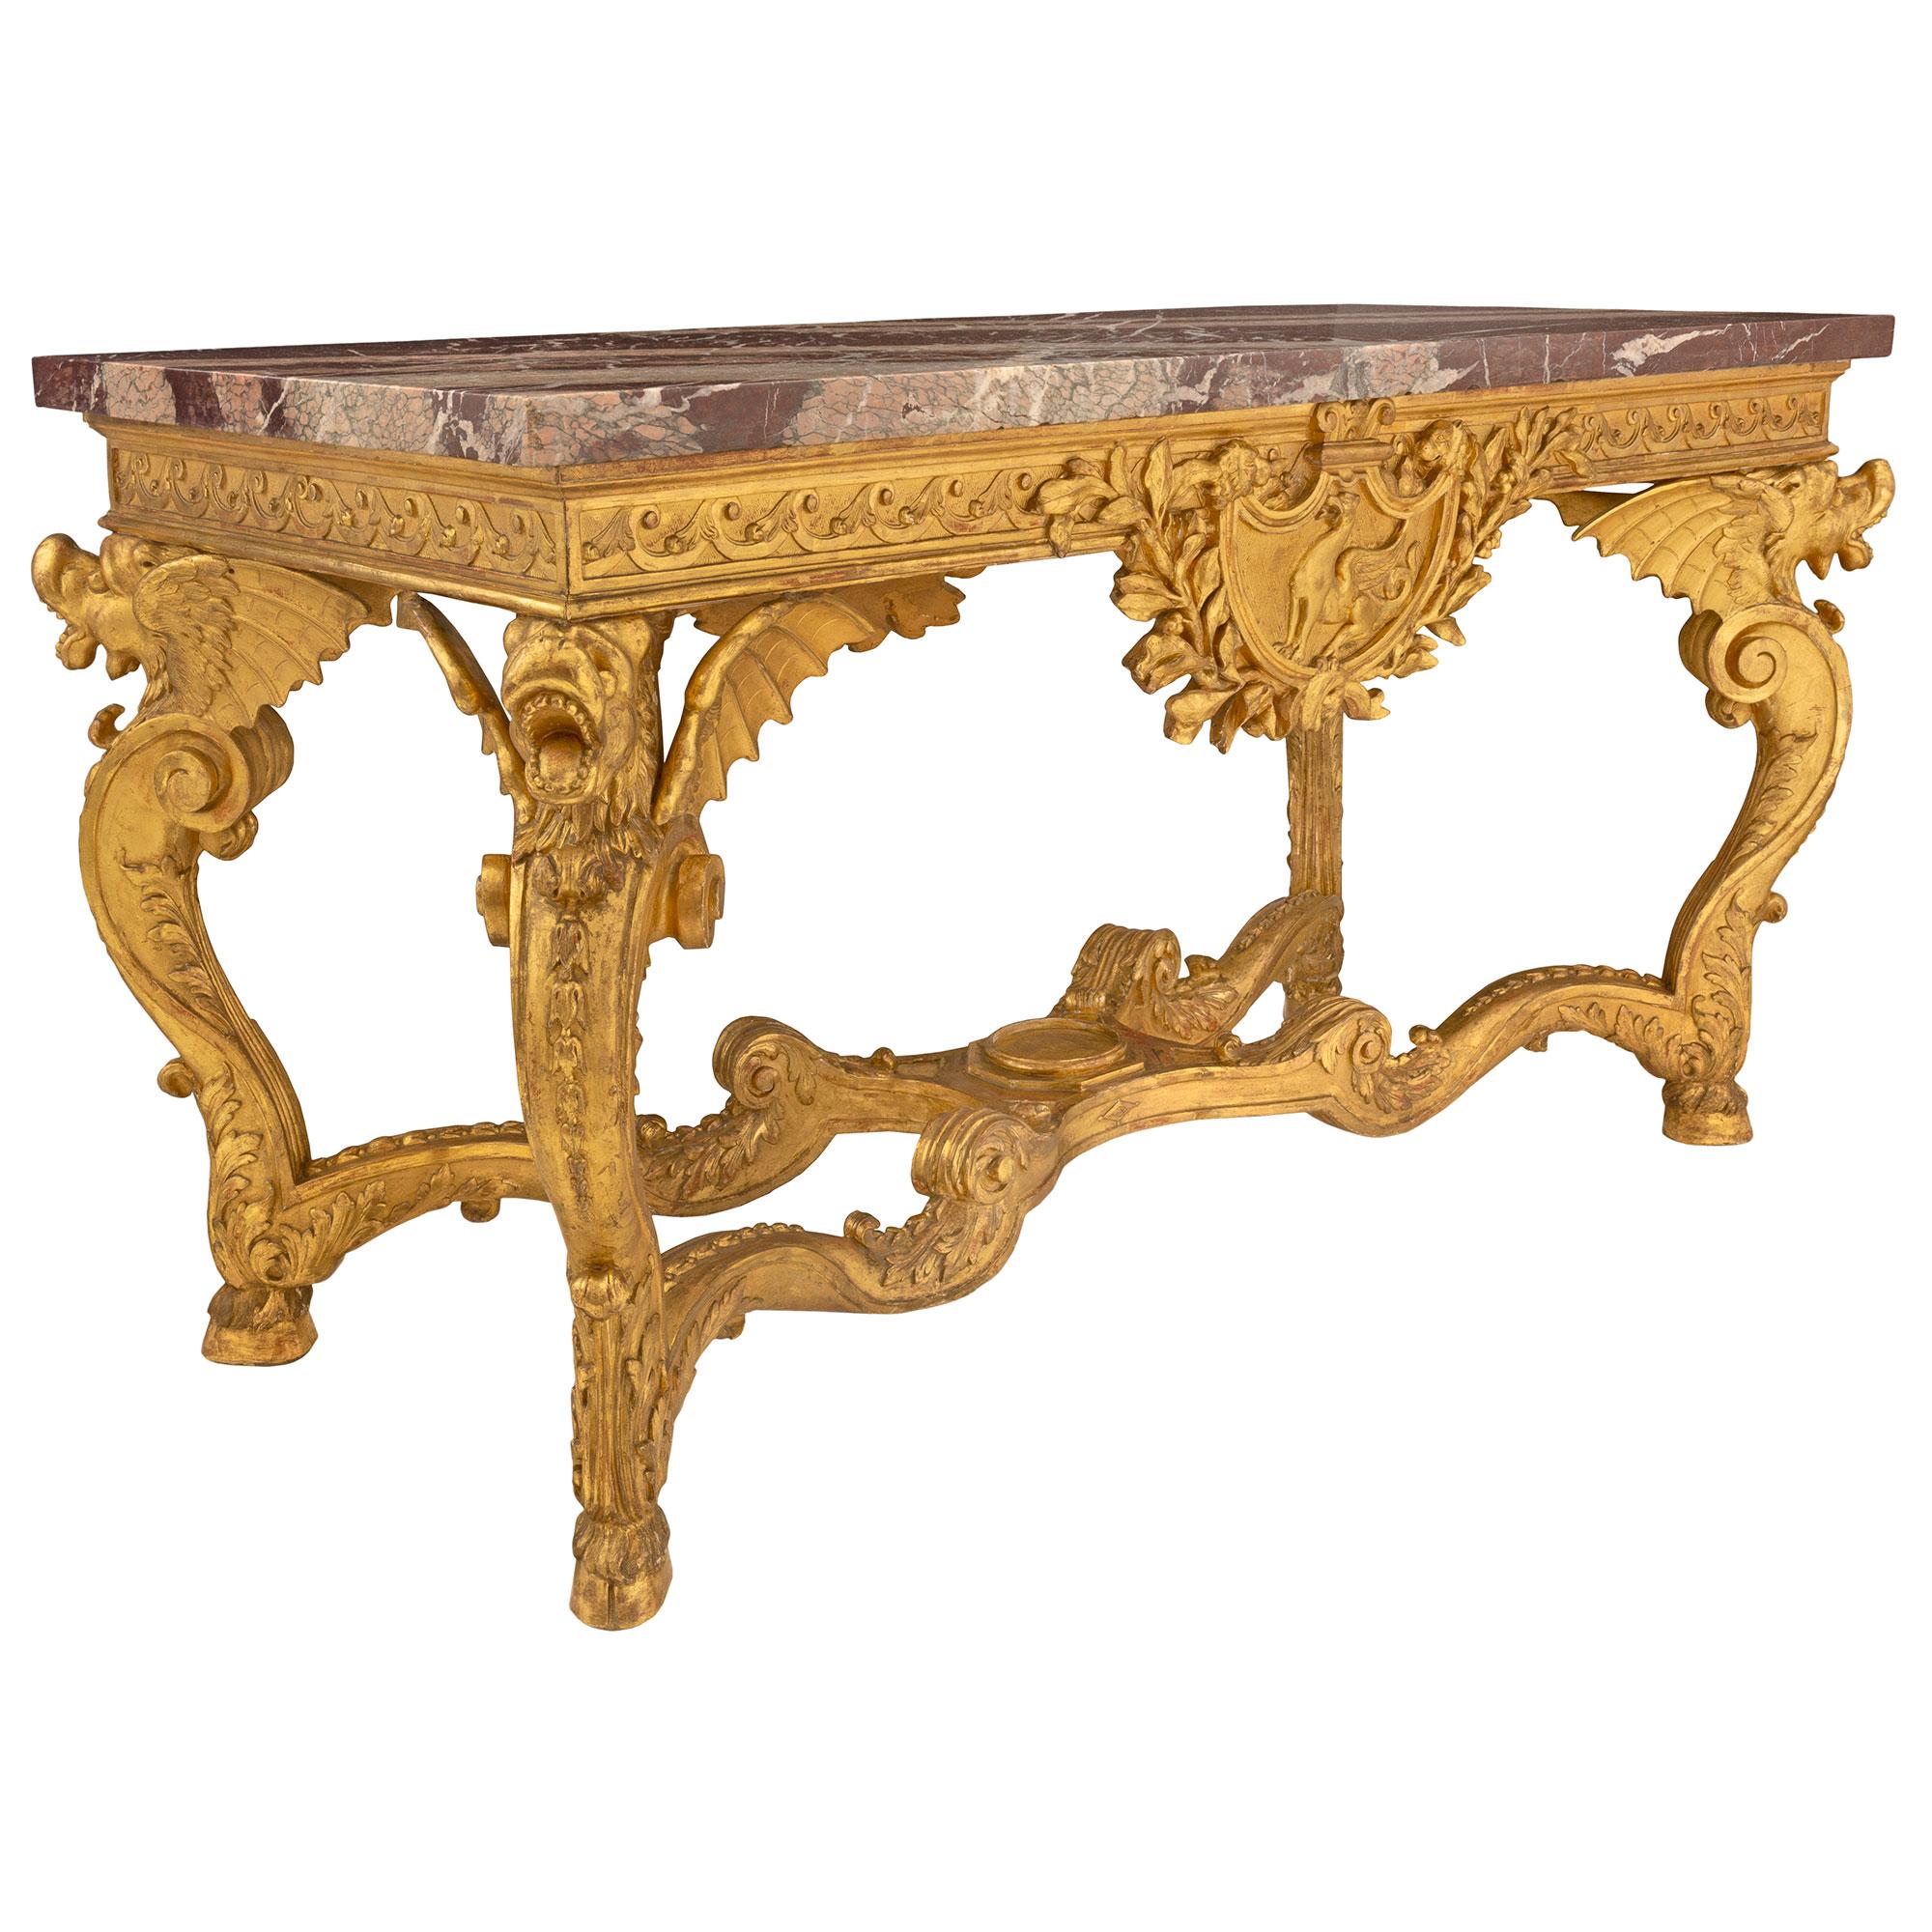 French Mid-19th Century Regence Style Giltwood and Marble Center Table In Good Condition For Sale In West Palm Beach, FL